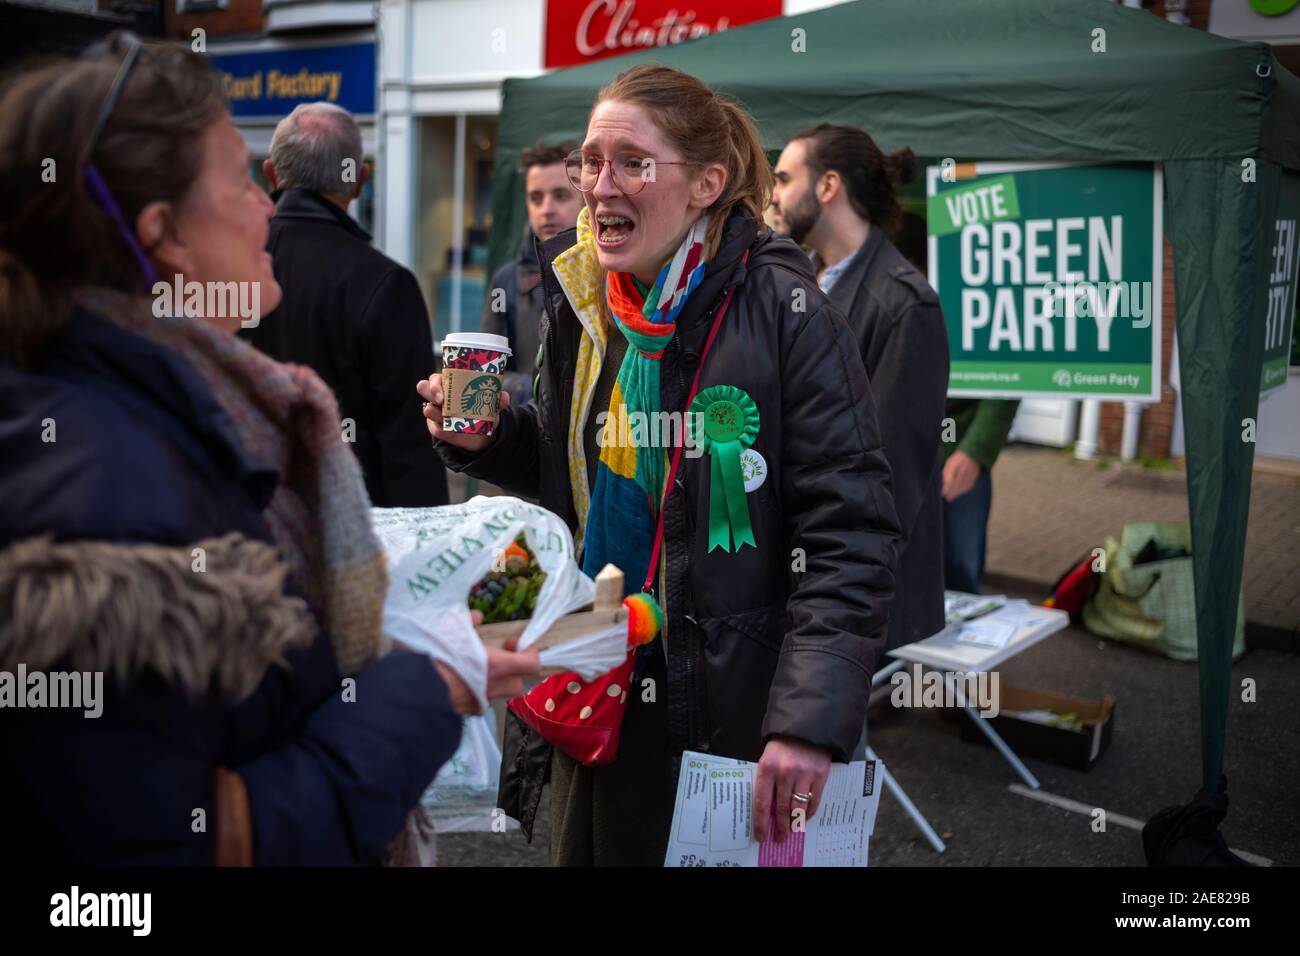 Essex, UK. 7th December 2019. Saffron Walden Essex UK 7 Dec 2019 Coby Wing Green Party candidate standing in 2019 General Election Coby Wing standing as the Green Party candidate in the 2019 British General Election to be held on 12 December 2019 with helpers on the Green Party stall in Saffron Walden in the constituency in north West Essex.The former ‘middle class’ homeless child and graduate on Job-Seekers allowance who has trained as a midwife and worked recently as a civil servant in education says she is targetting the local Tory Party vote in Kemi Badenoch rather than standing aside to h Stock Photo